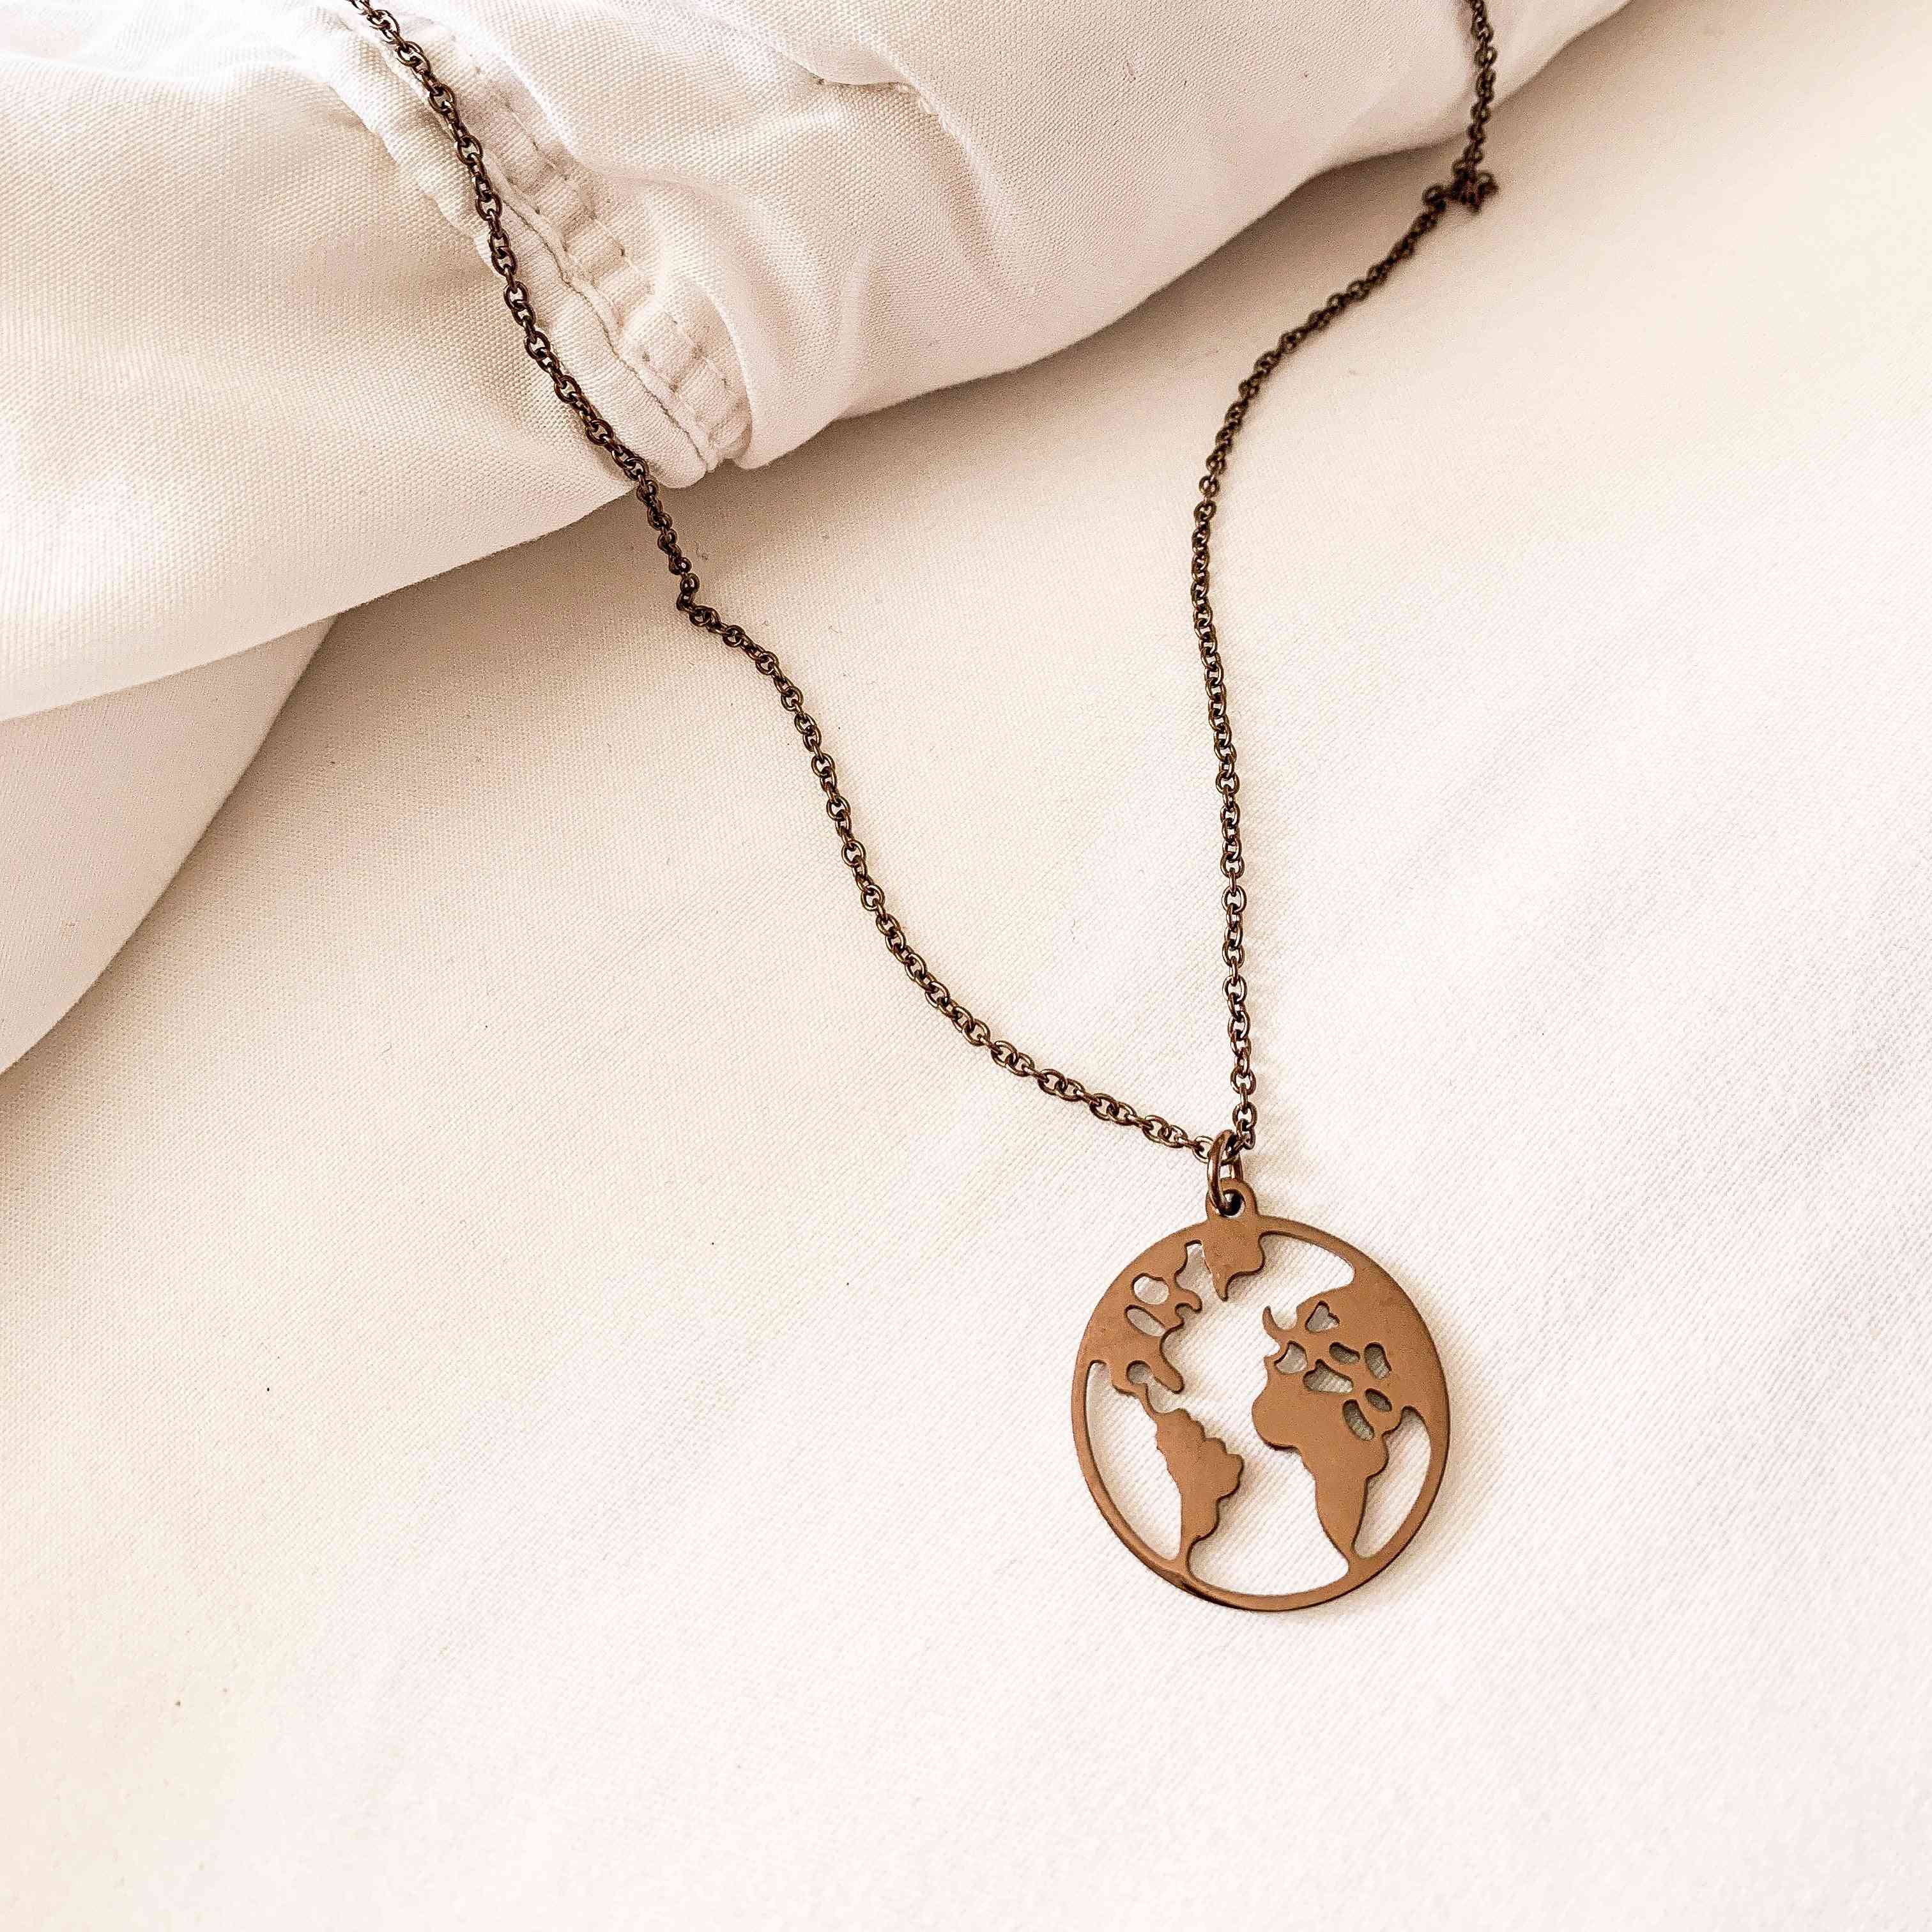 Stainless Steel My World Necklace